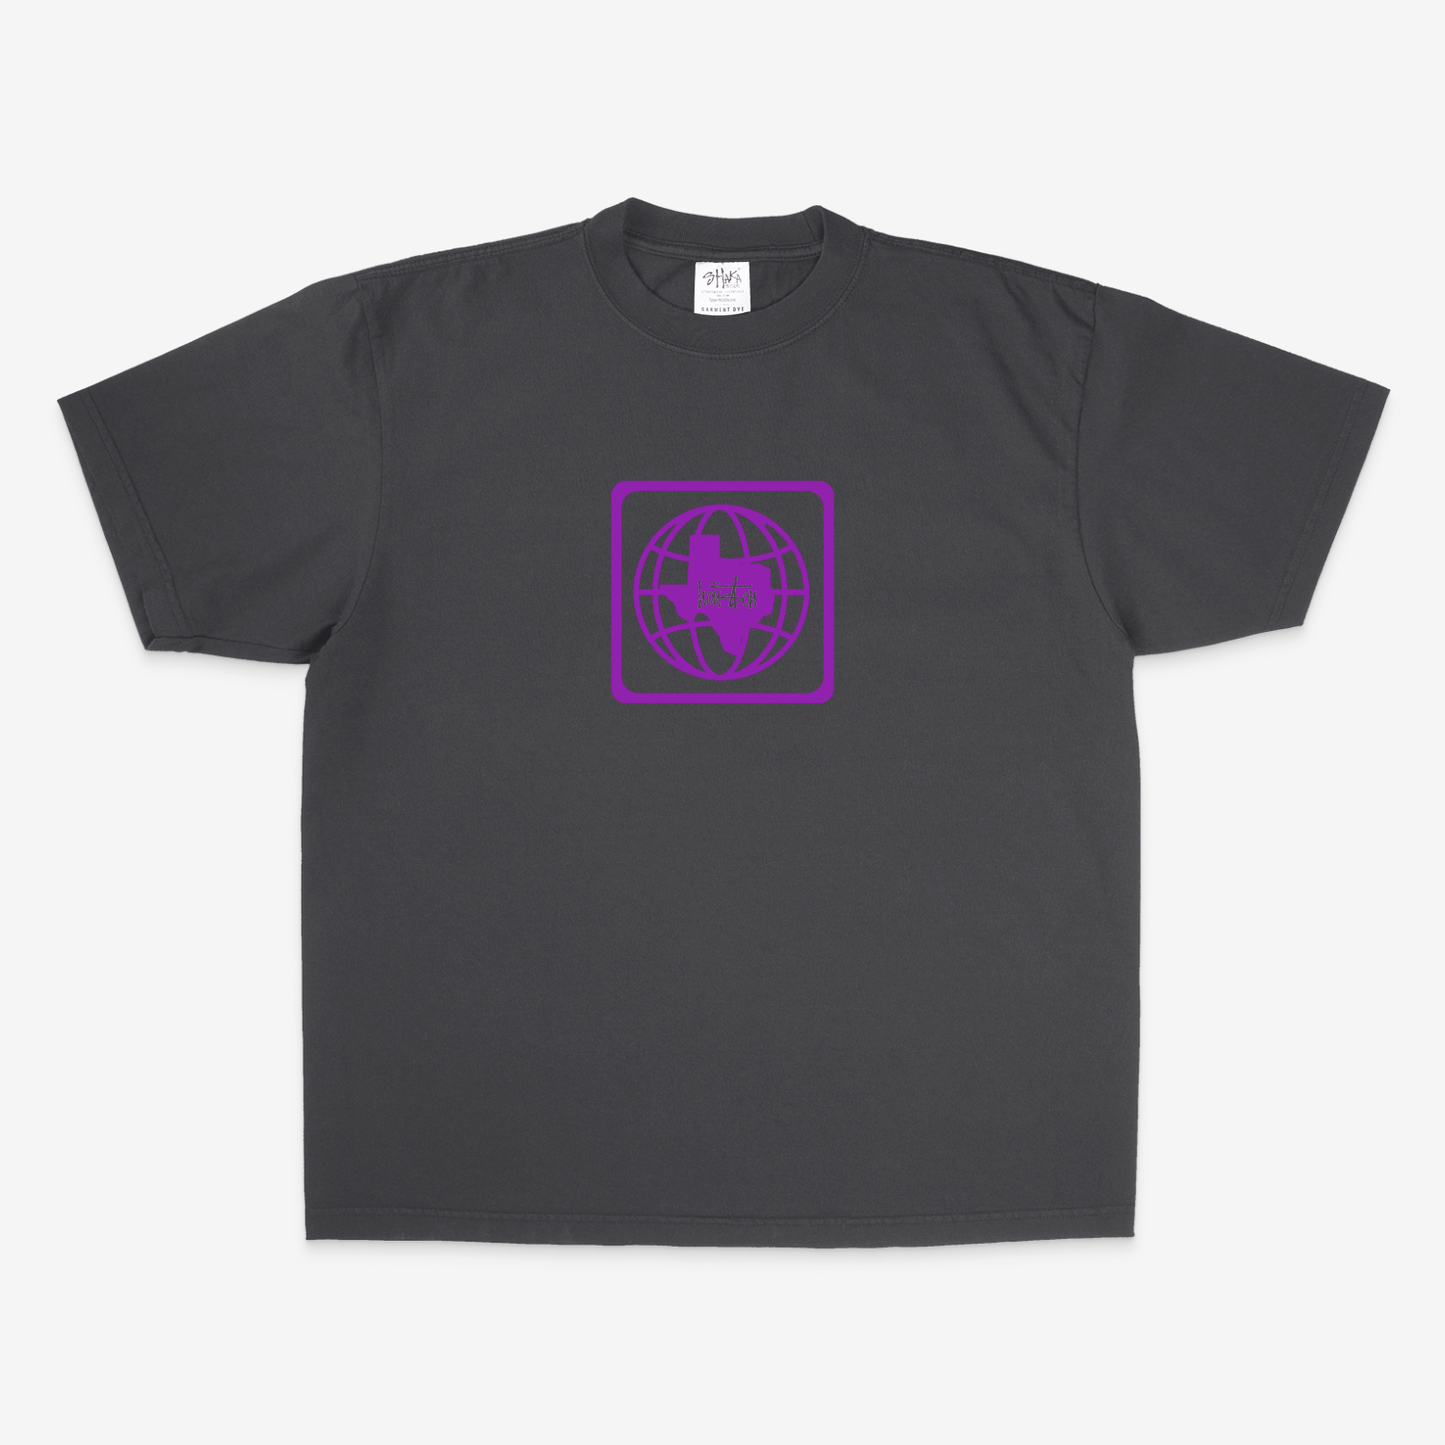 The City of Screw T-Shirt